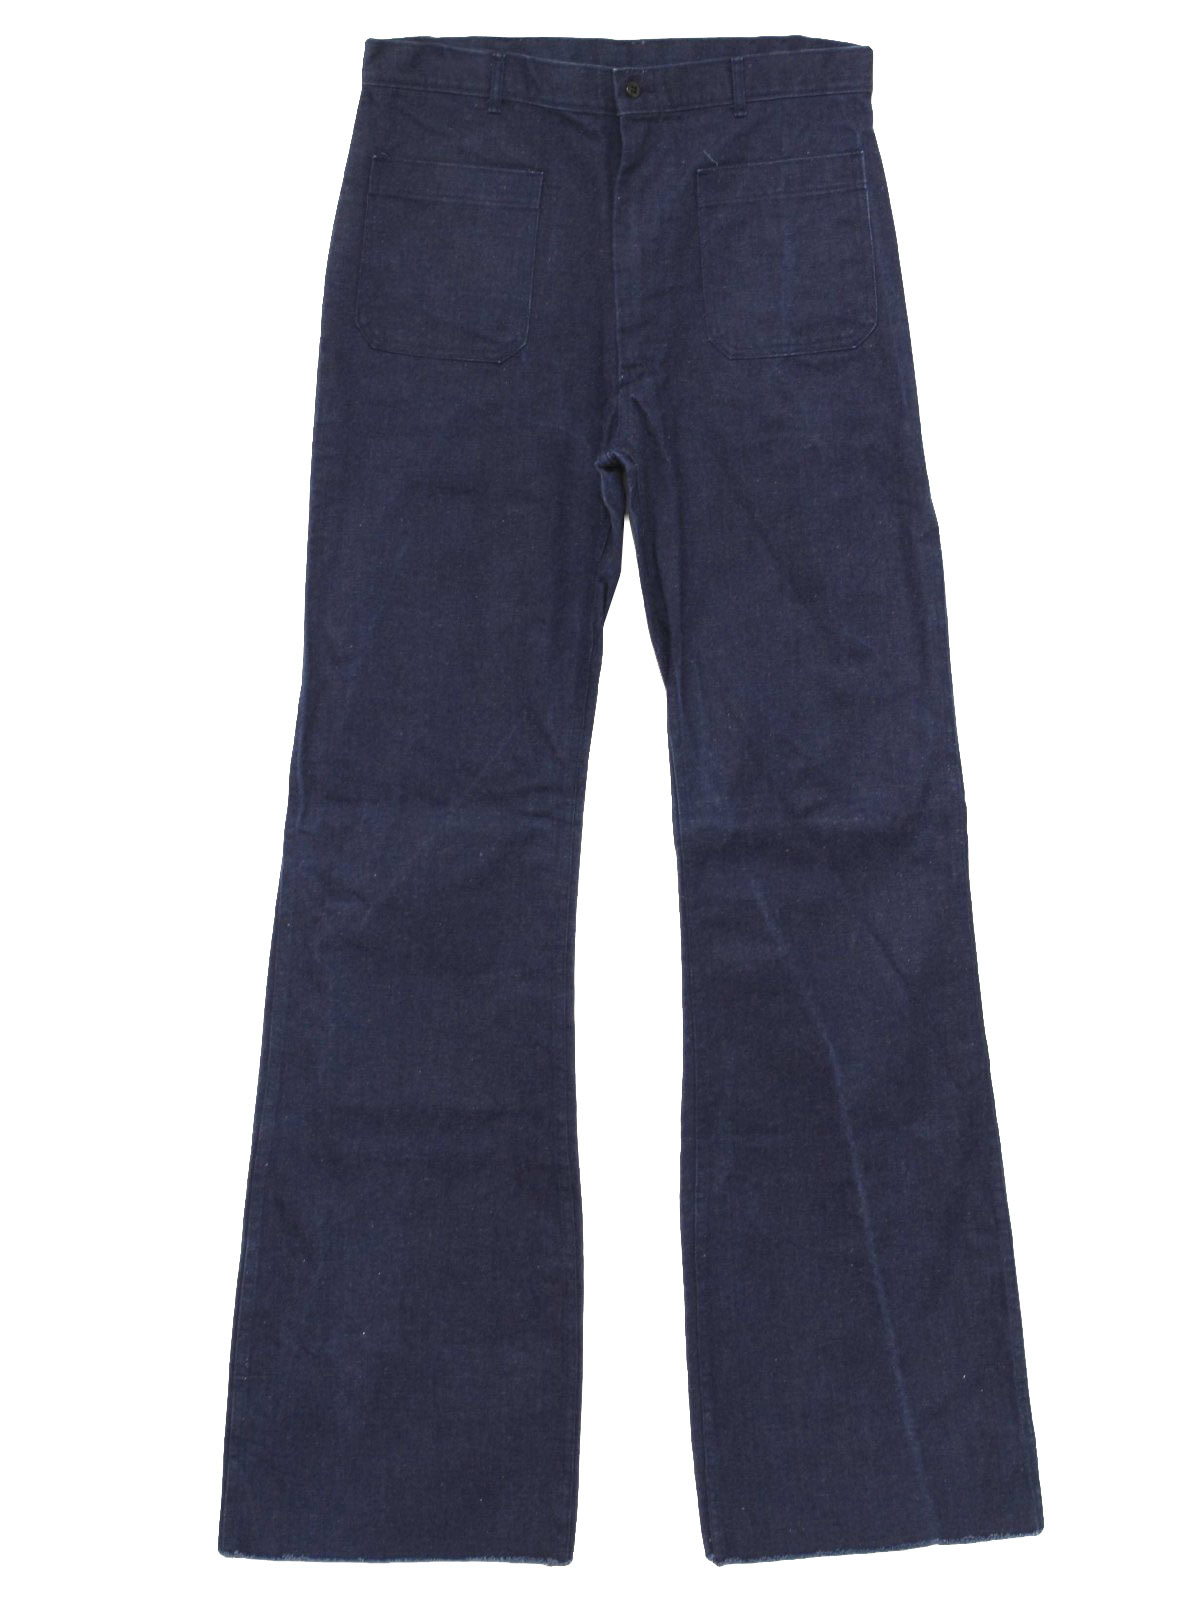 70s Vintage Service Trousers Bellbottom Pants: 70s -Service Trousers ...